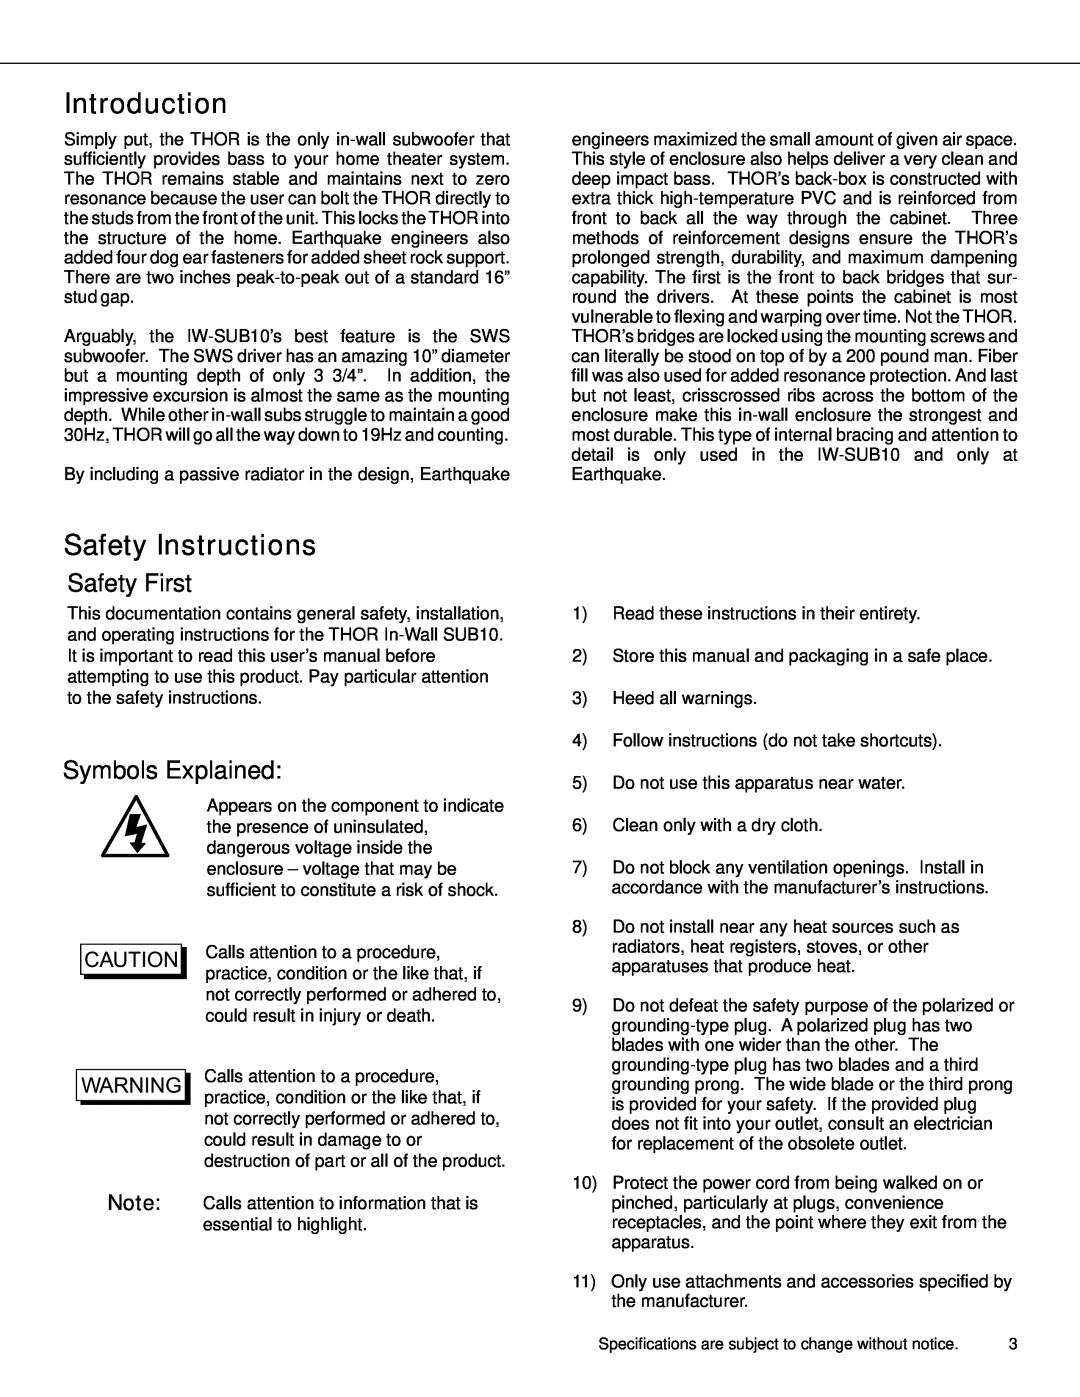 Earthquake Sound THOR IW--SUB10 user manual Introduction, Safety Instructions, Safety First, Symbols Explained 